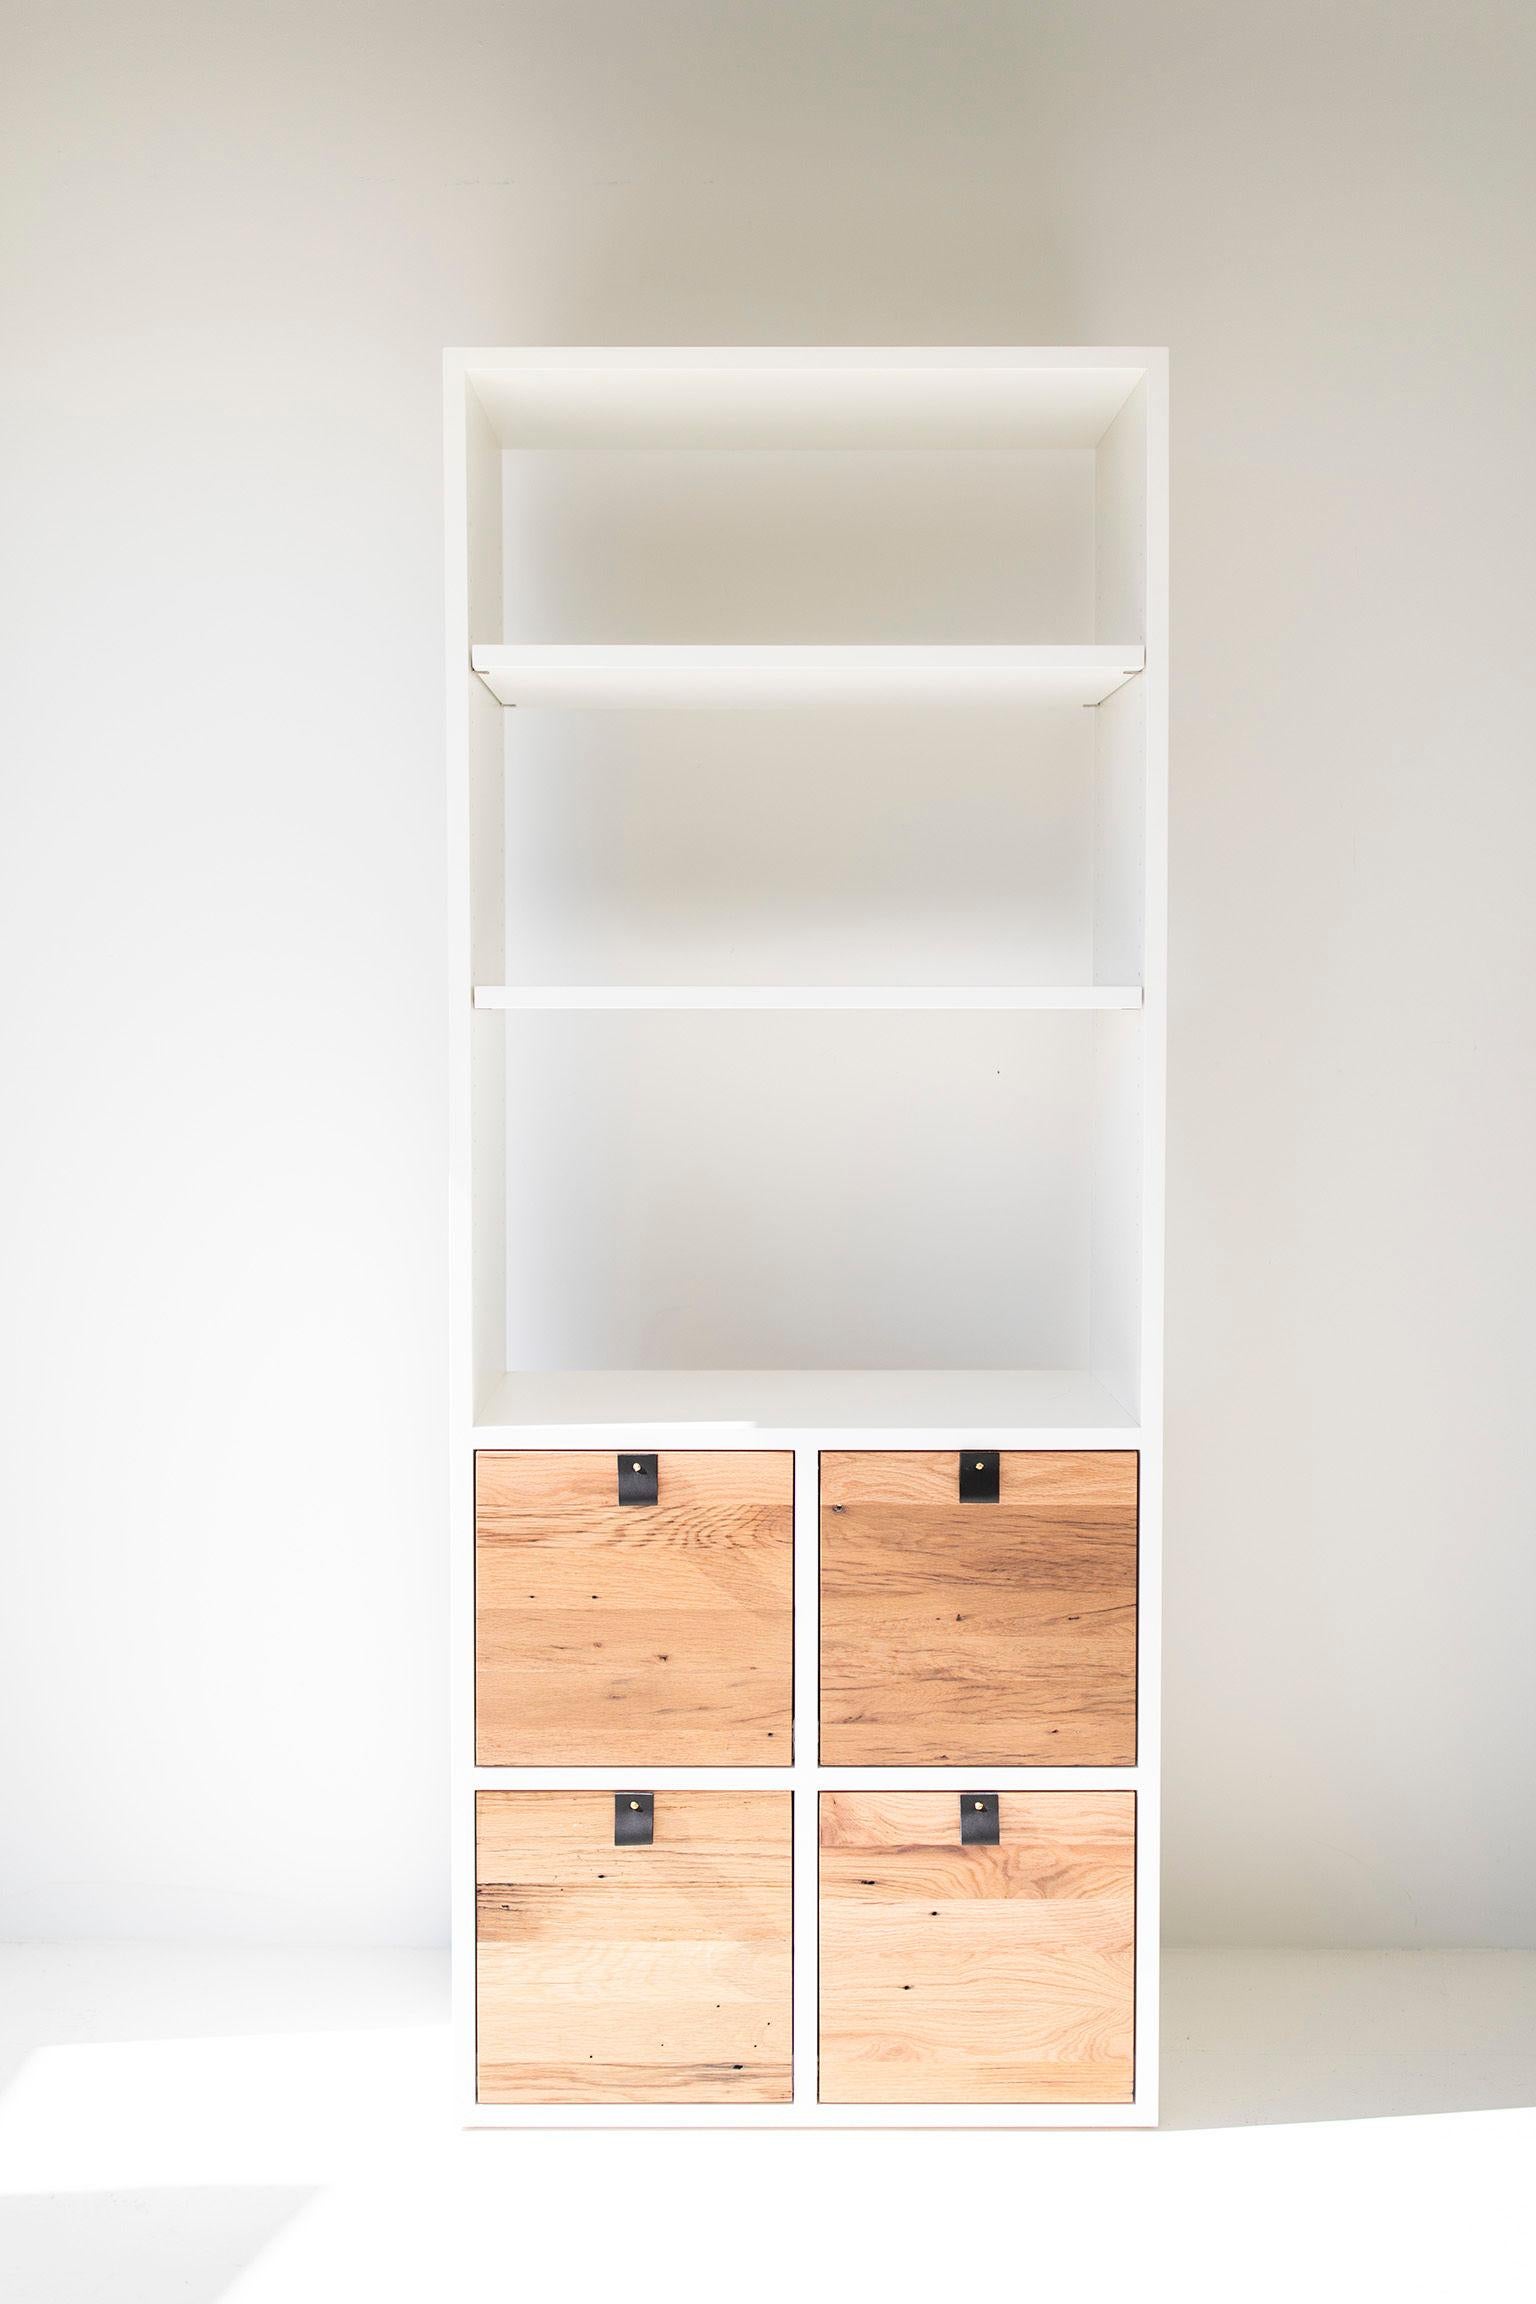 Sorry, we are no longer offering reclaimed oak. If you like this design, please contact us for pricing on other wood species!

This modern wall unit for Bertu Home is made to order and has the best of both worlds - open shelving and closed drawers.